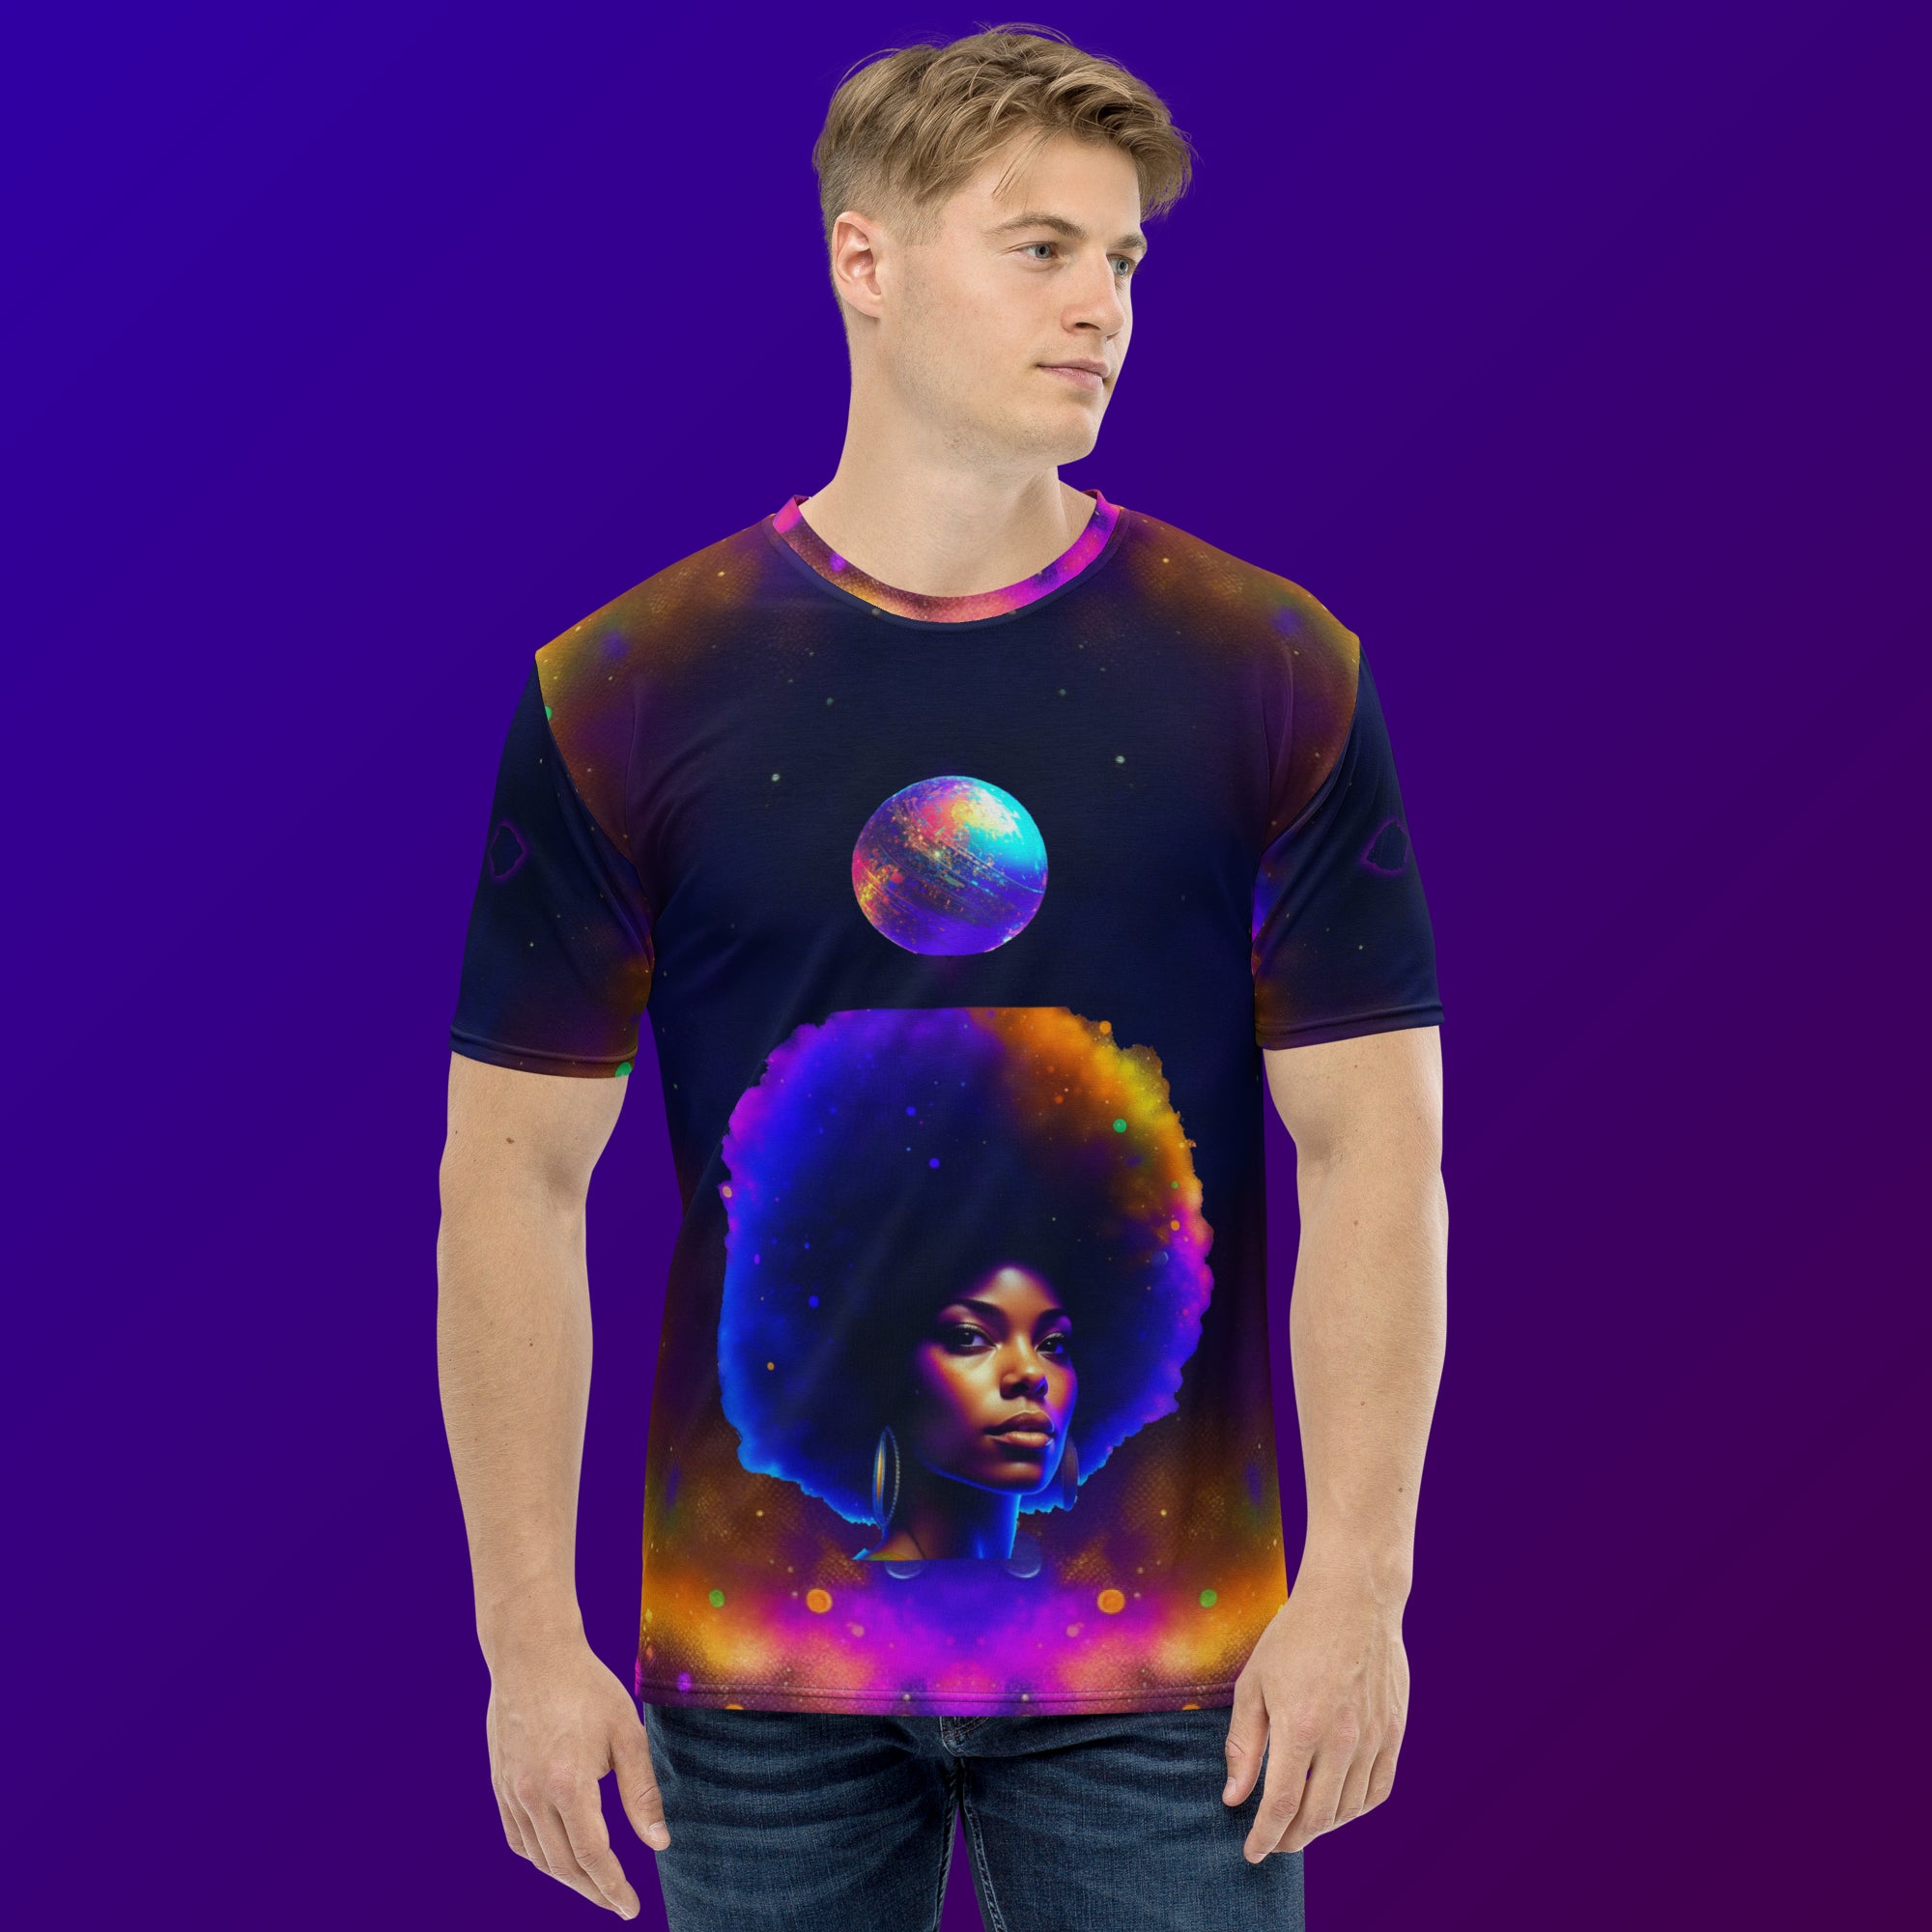 This men's DISCO GALAXY T-SHIRT features a groovy psychedelic design that showcases a disco ball amid a vibrant galaxy of stars. The funky design is topped off with women with afro hair, creating a unique and eye-catching look.  Get Groovy Baby! 